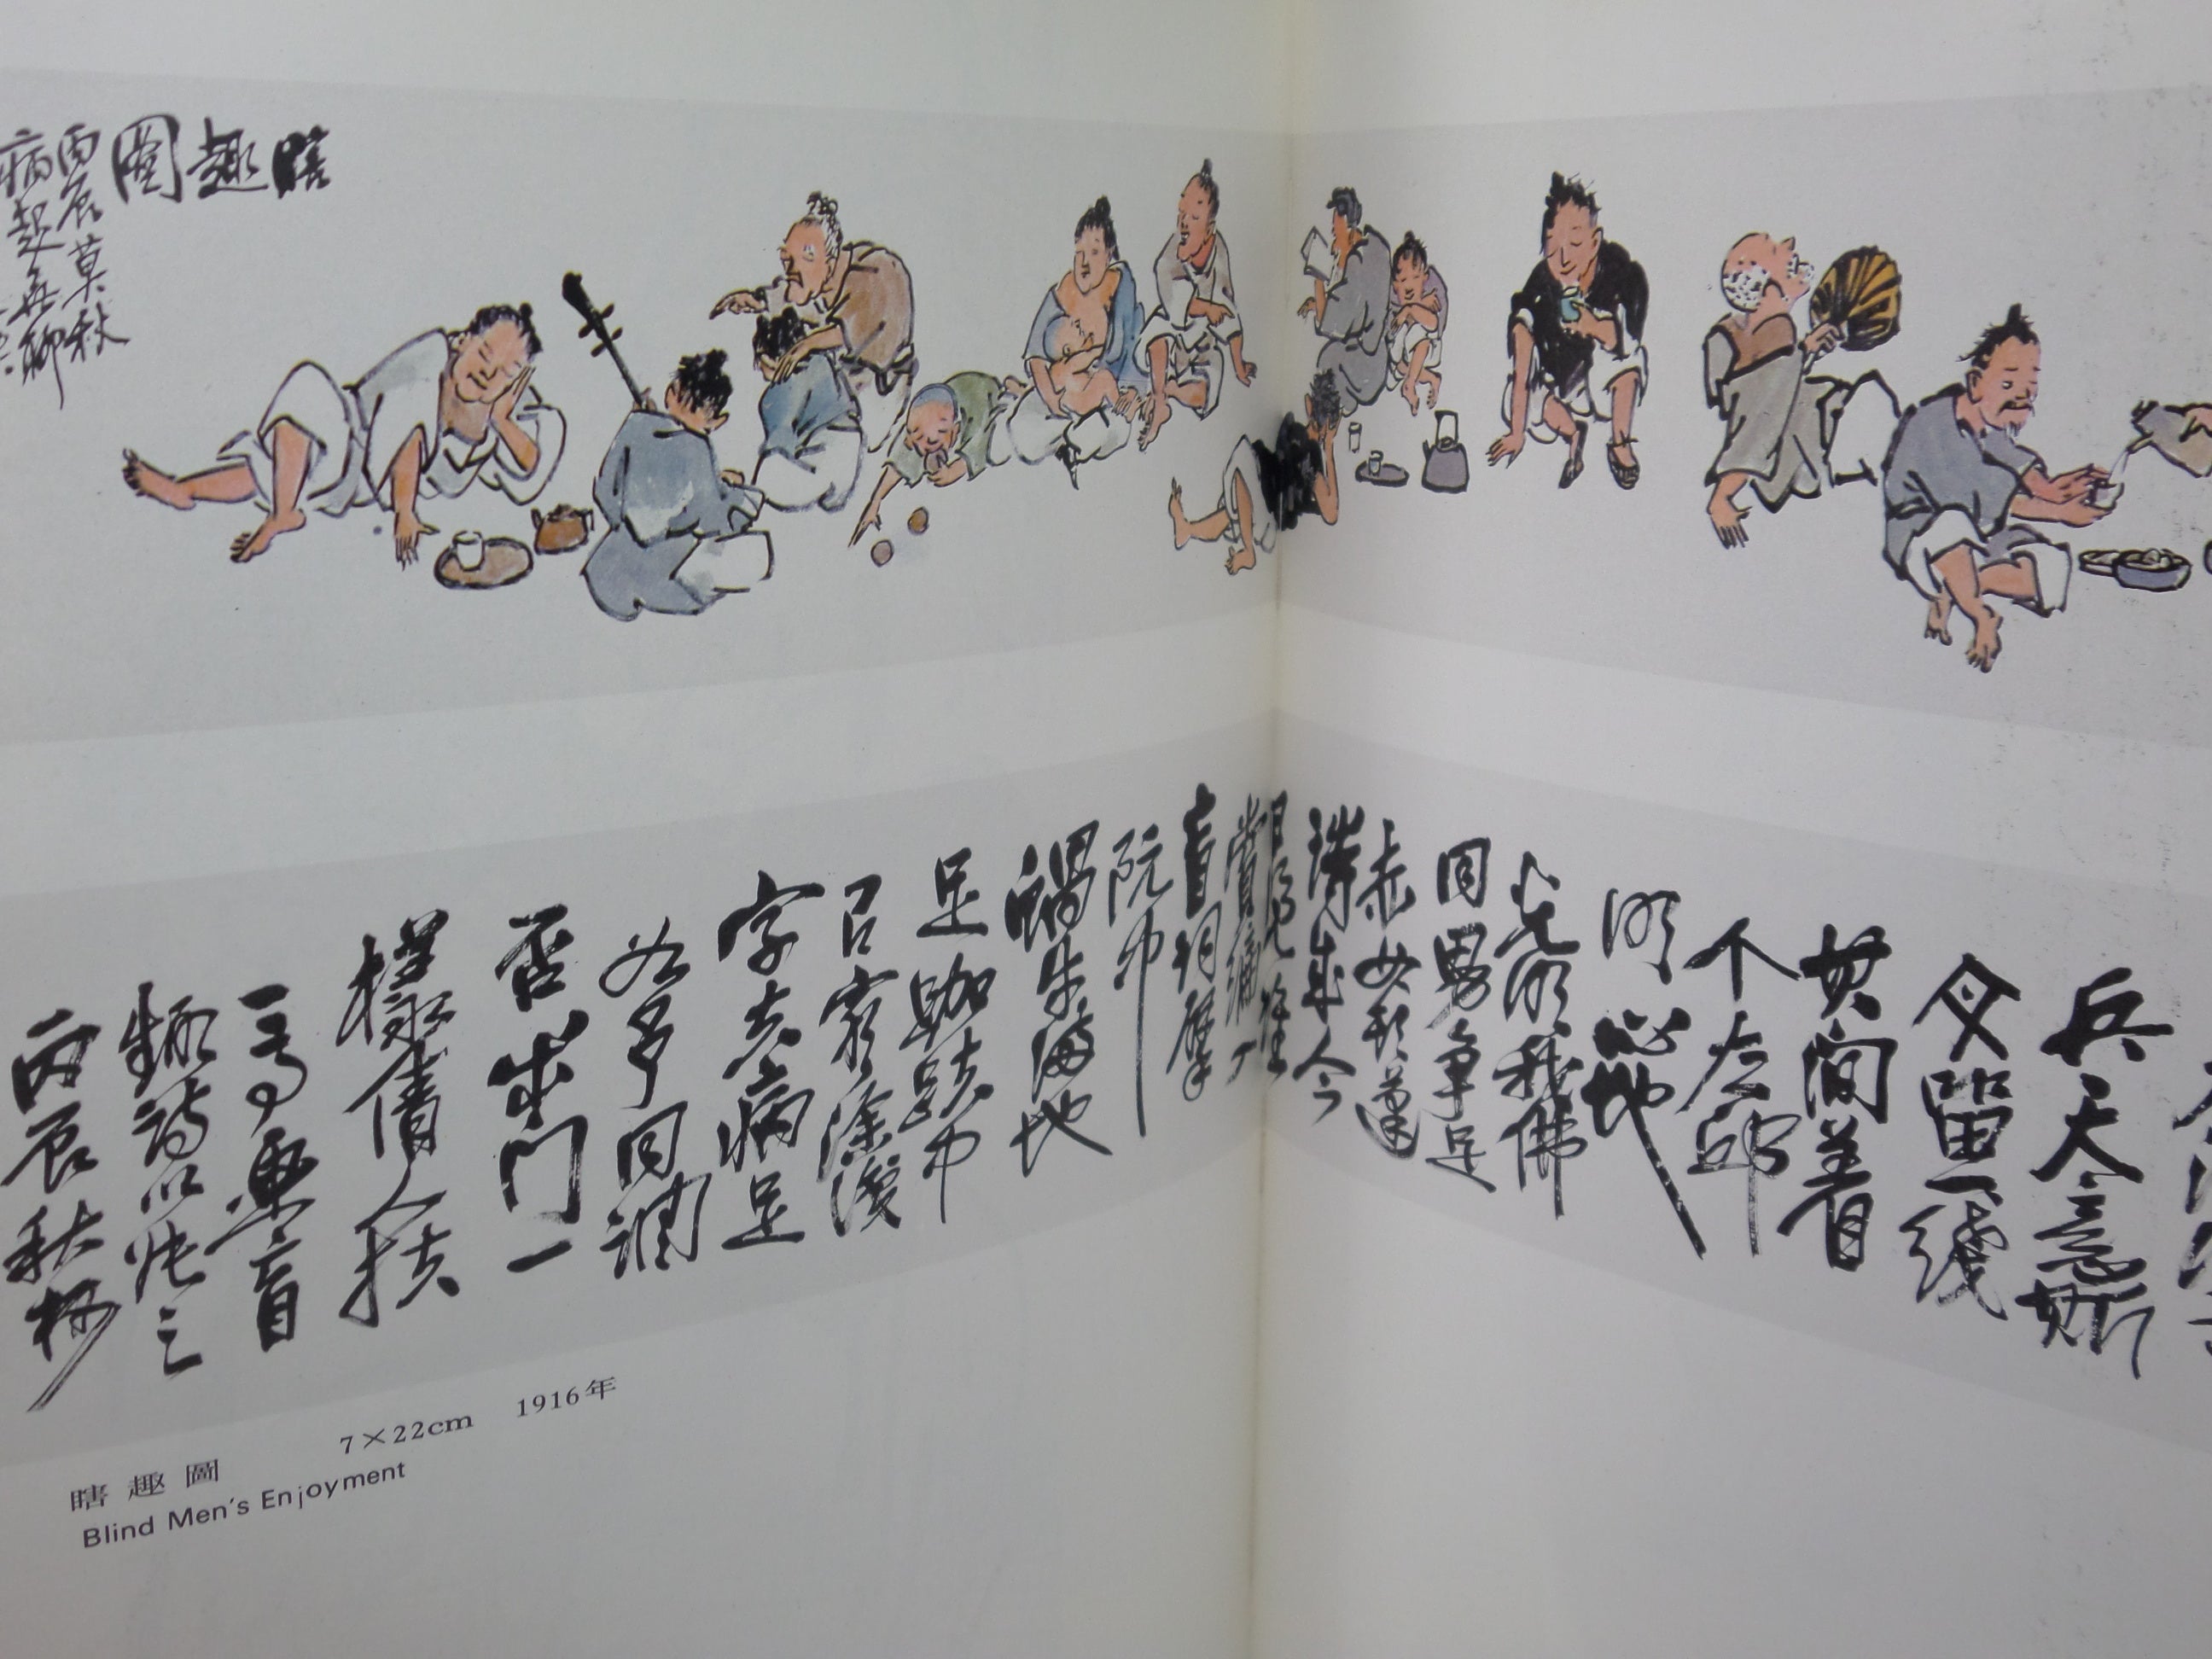 A COLLECTION OF WANG YITING'S CALLIGRAPHY AND PAINTINGS 1988 HARDBACK